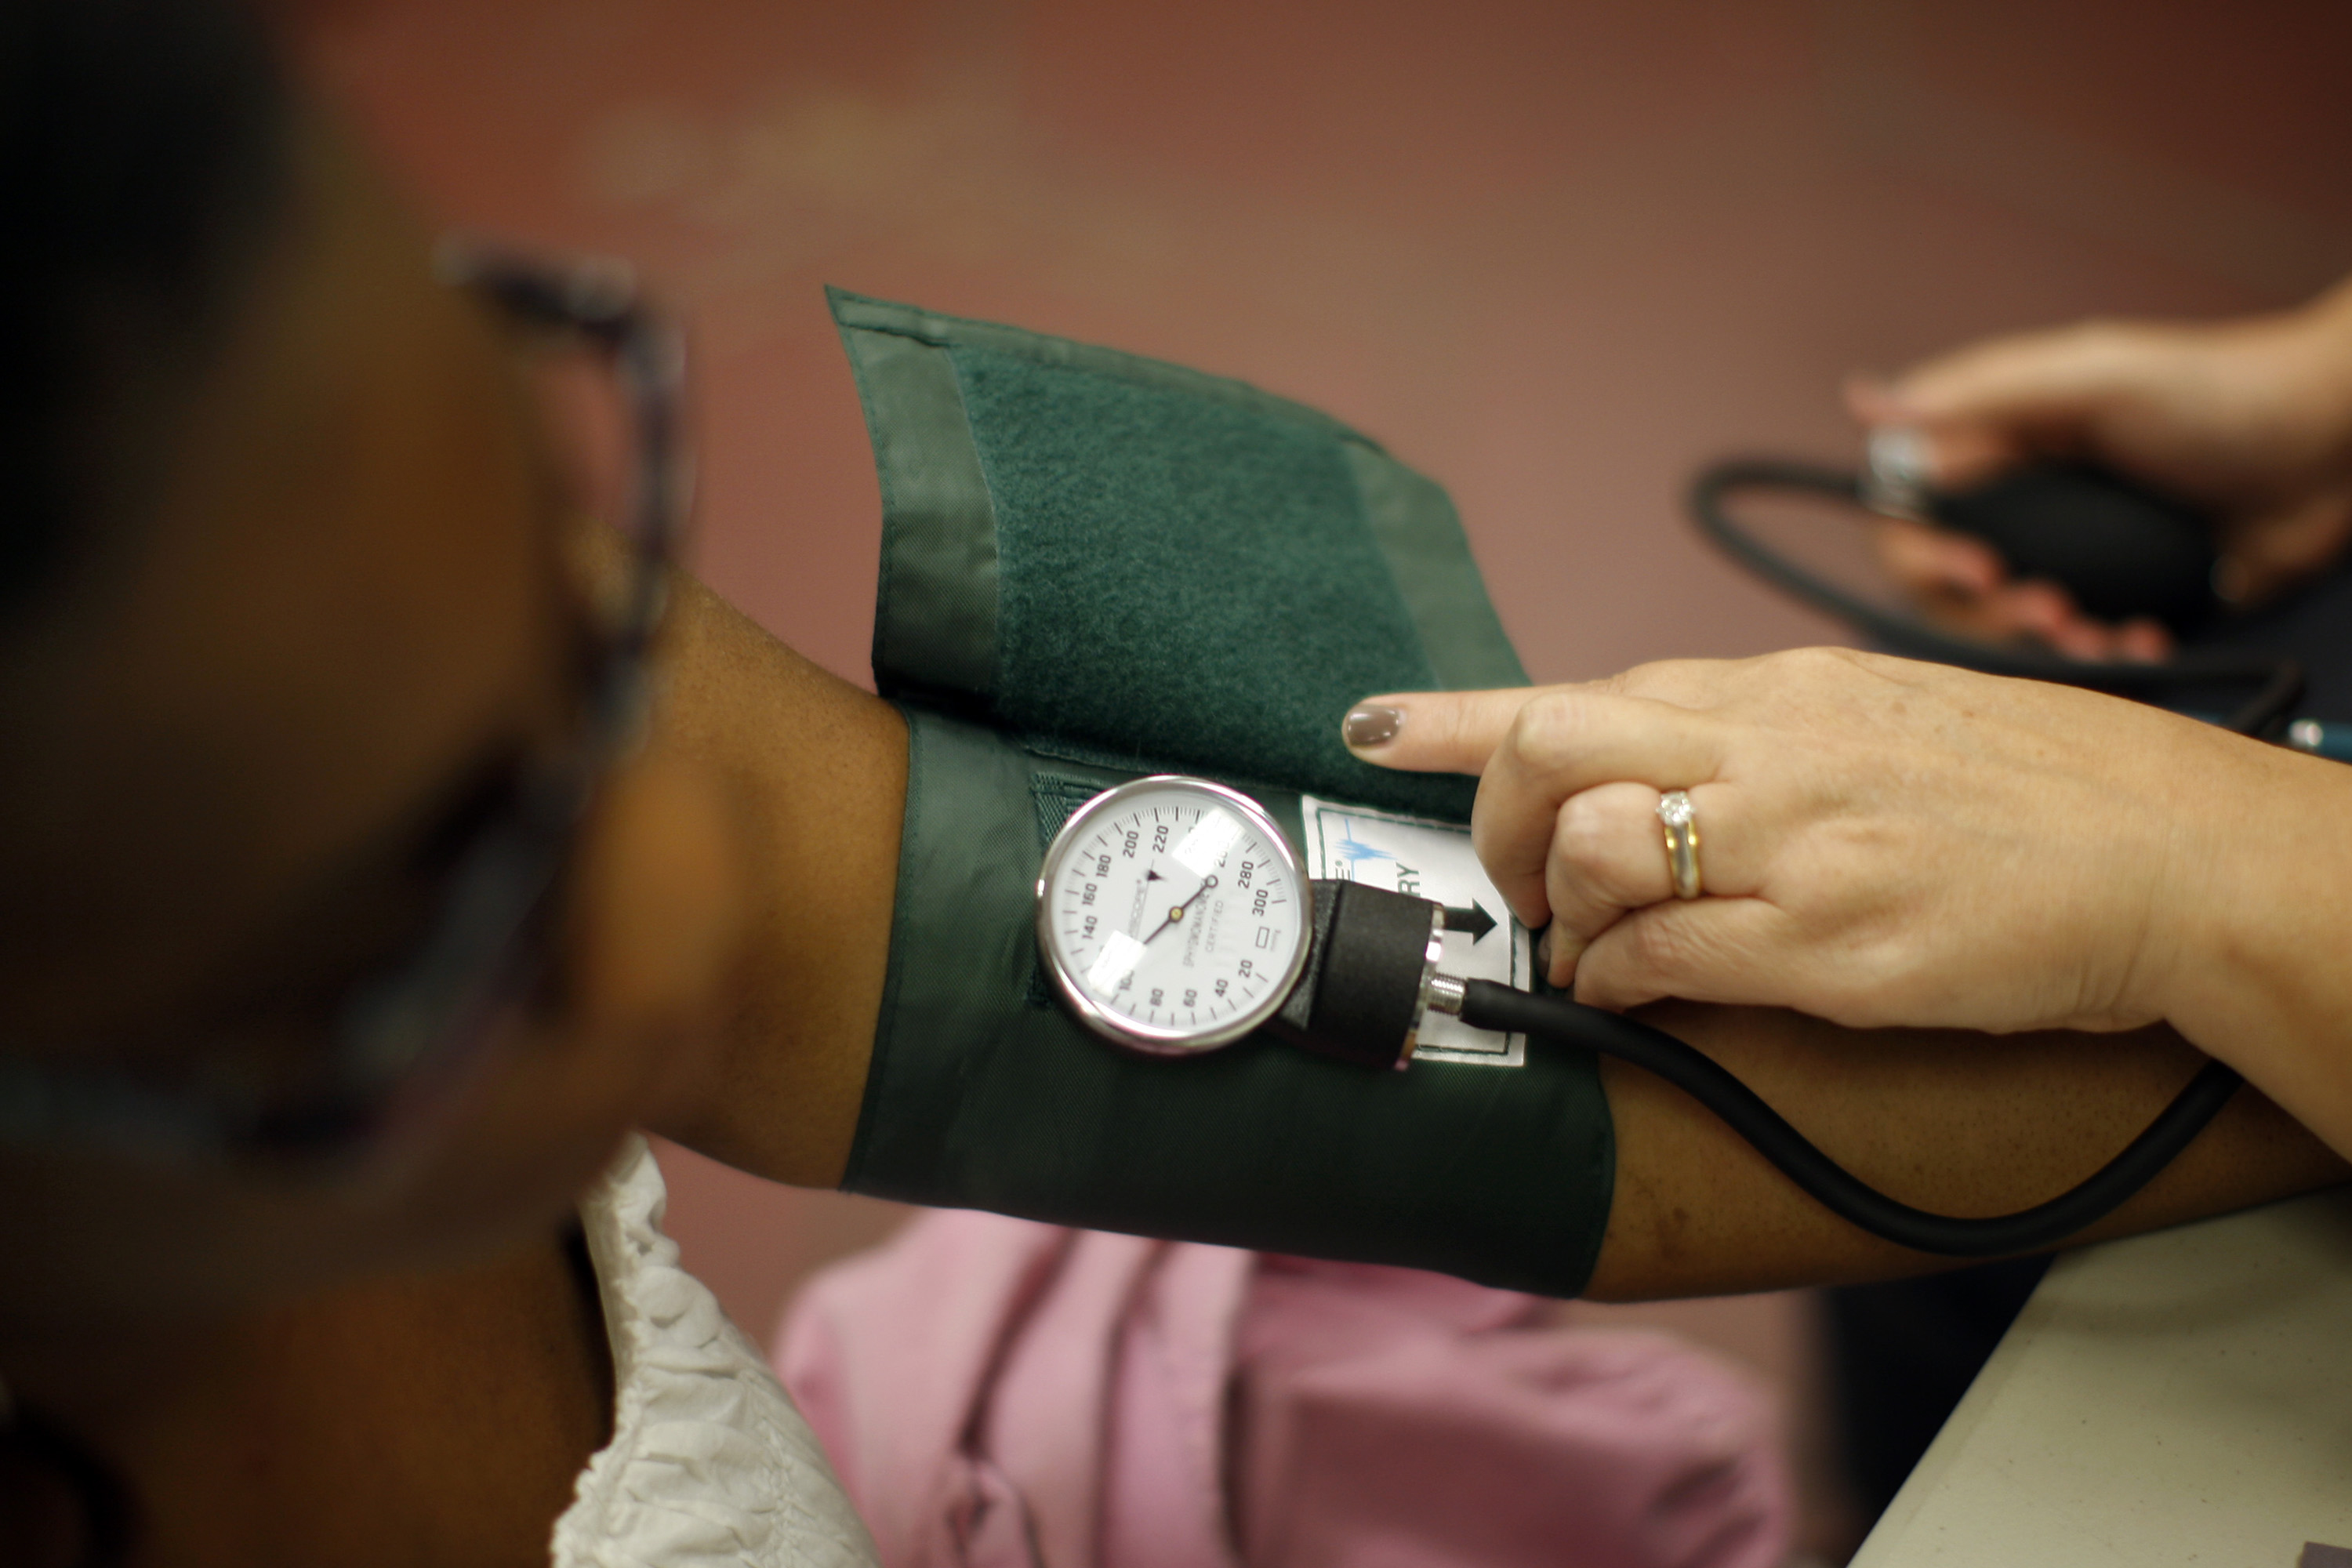 Study of 64,000 patients shows value of 24-hour blood pressure